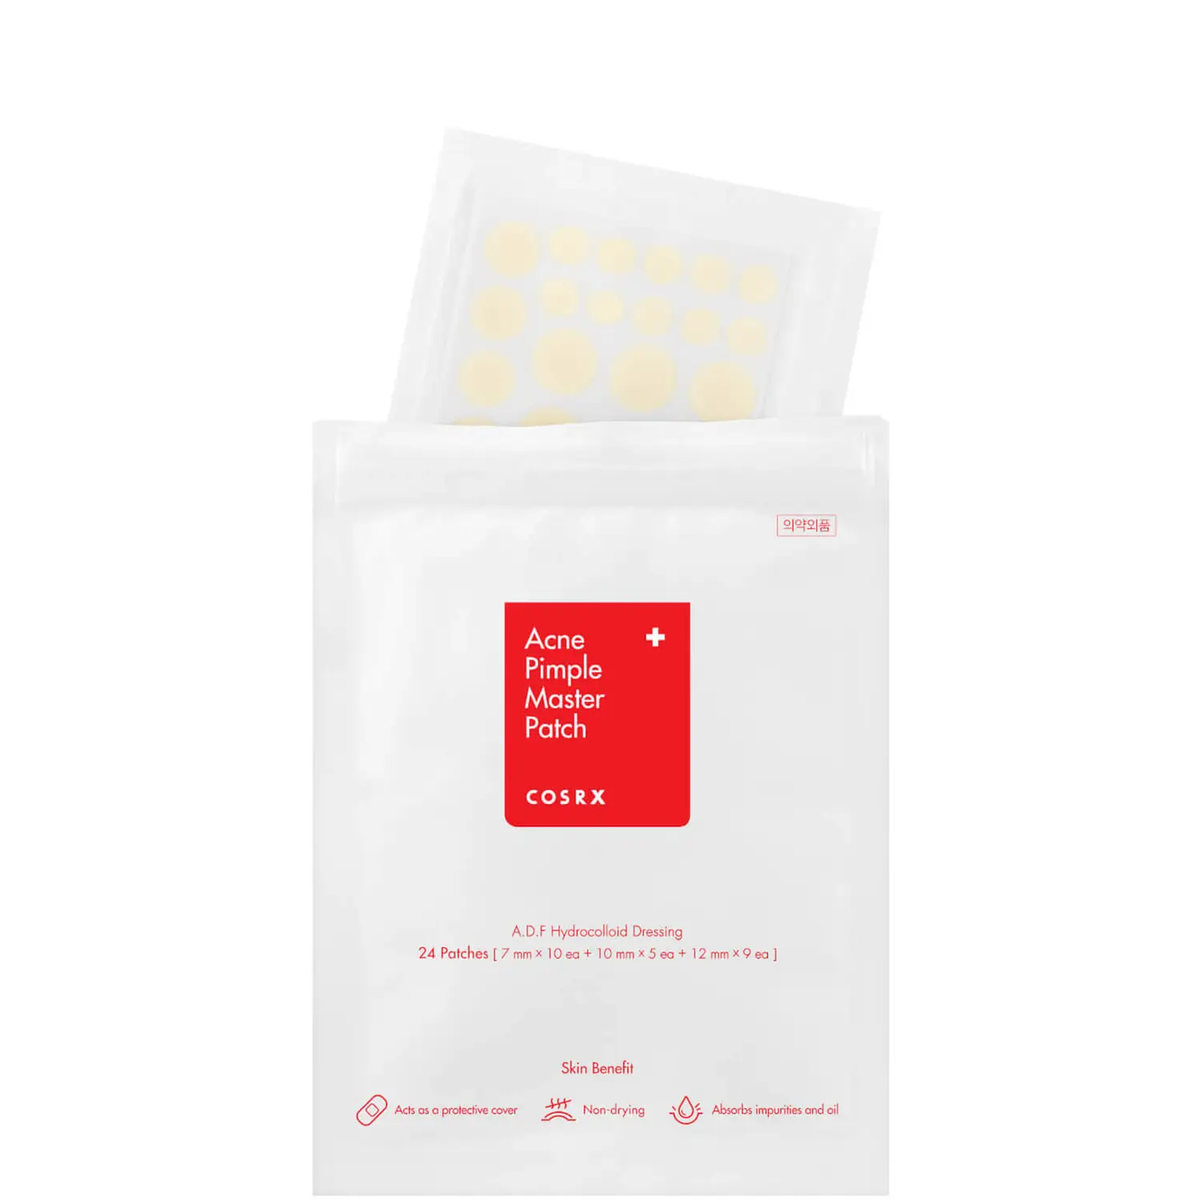 COSRX Acne Pimple Master Patch (1 sheet)